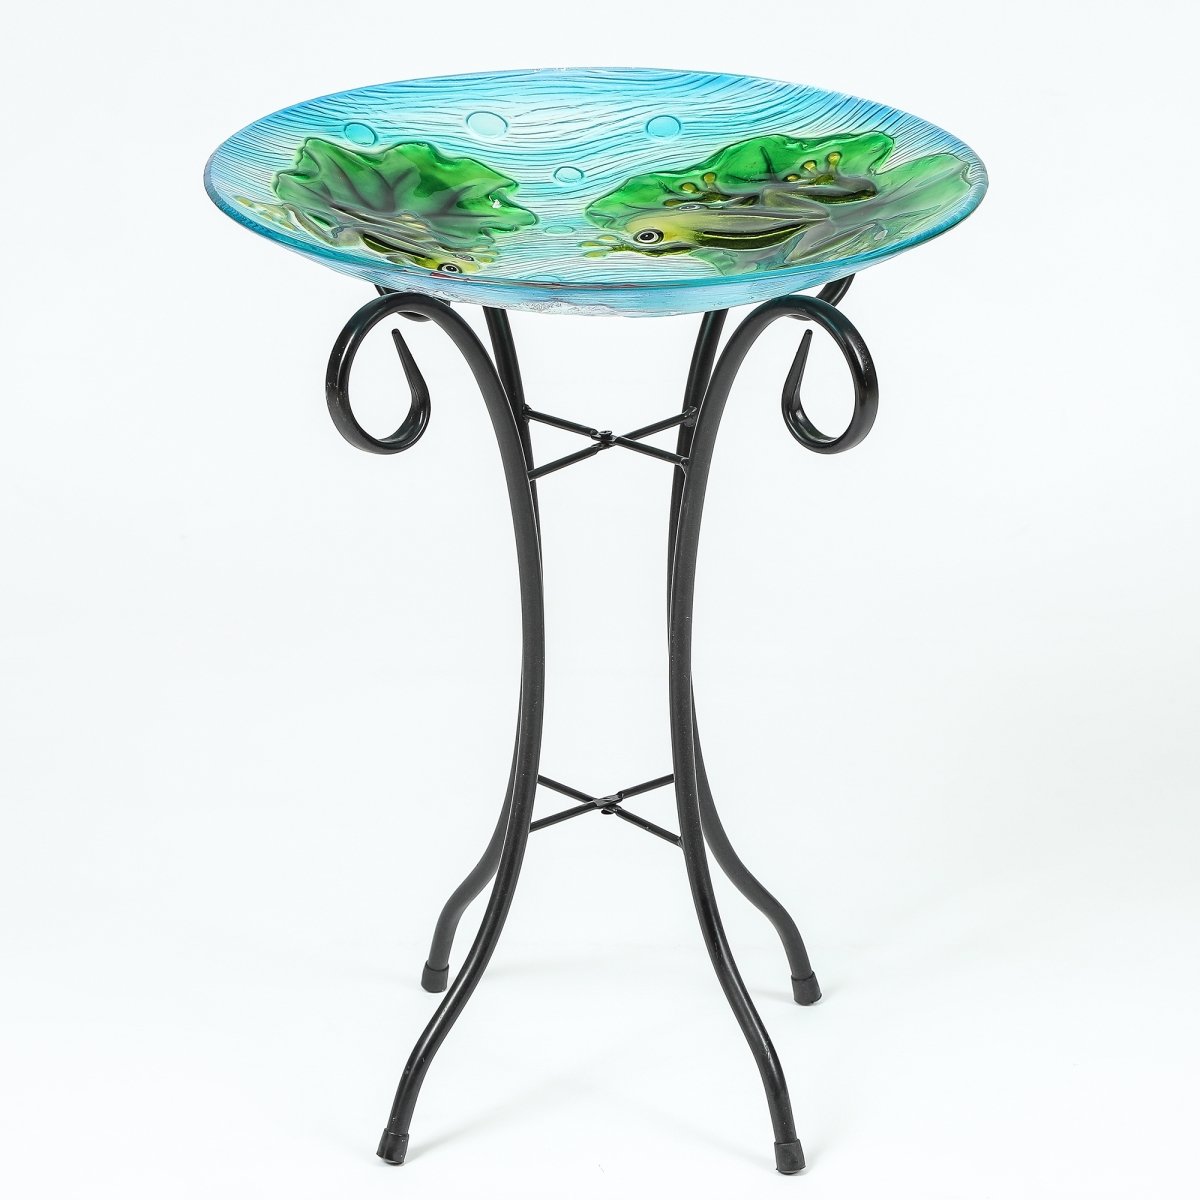 Luxen Home Whp424 Glass Frog & Lilypad Bird Bath With Metal Stand - 22 X 18.1 X 18.1 In.